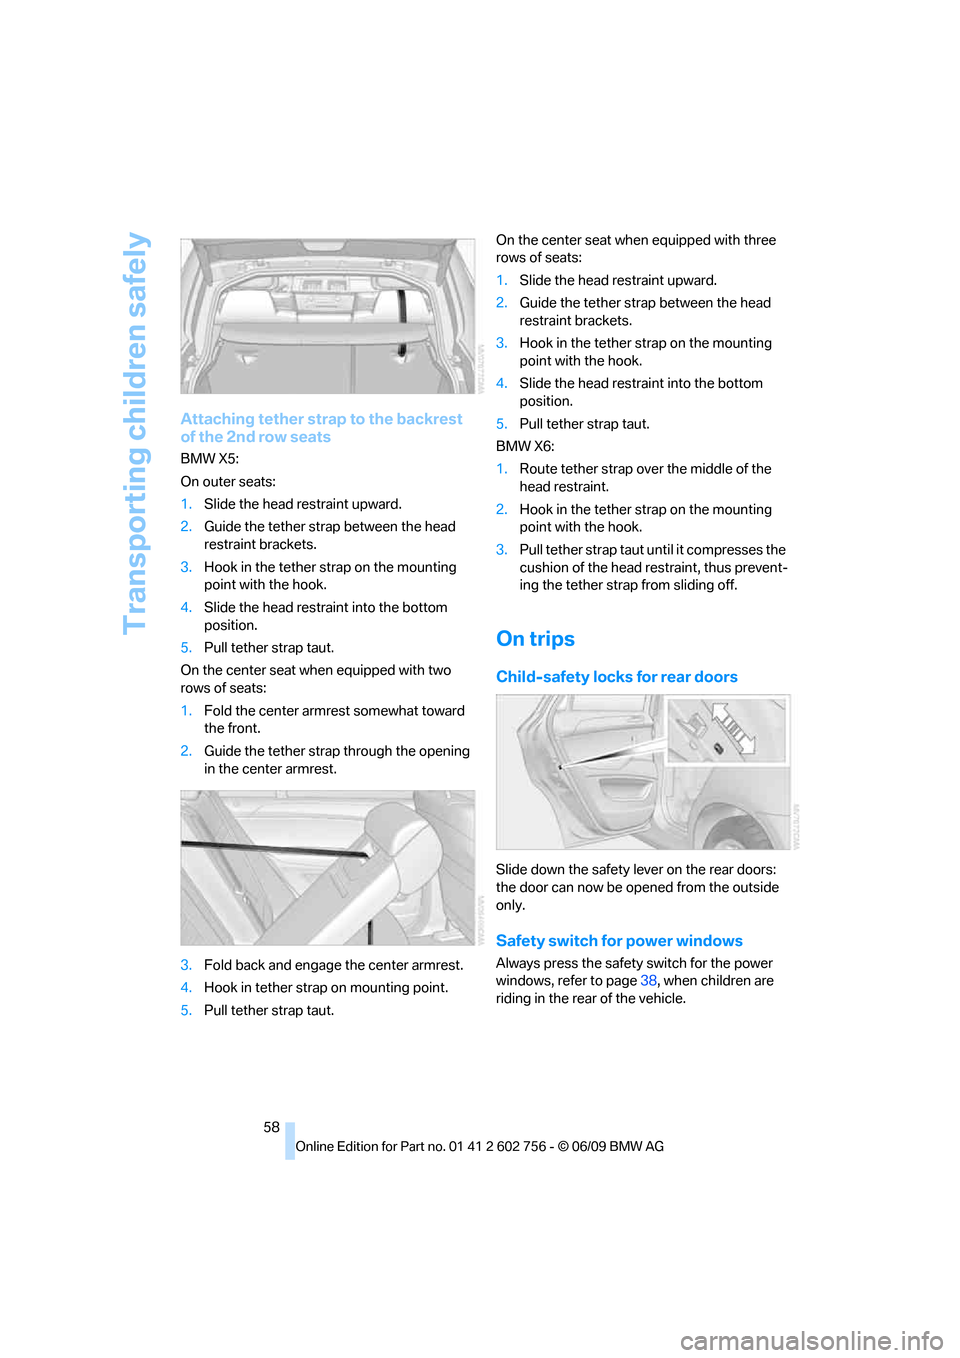 BMW X5 2010 E70 Owners Manual Transporting children safely
58
Attaching tether strap to the backrest 
of the 2nd row seats
BMW X5:
On outer seats:
1.Slide the head restraint upward.
2.Guide the tether strap between the head 
restr